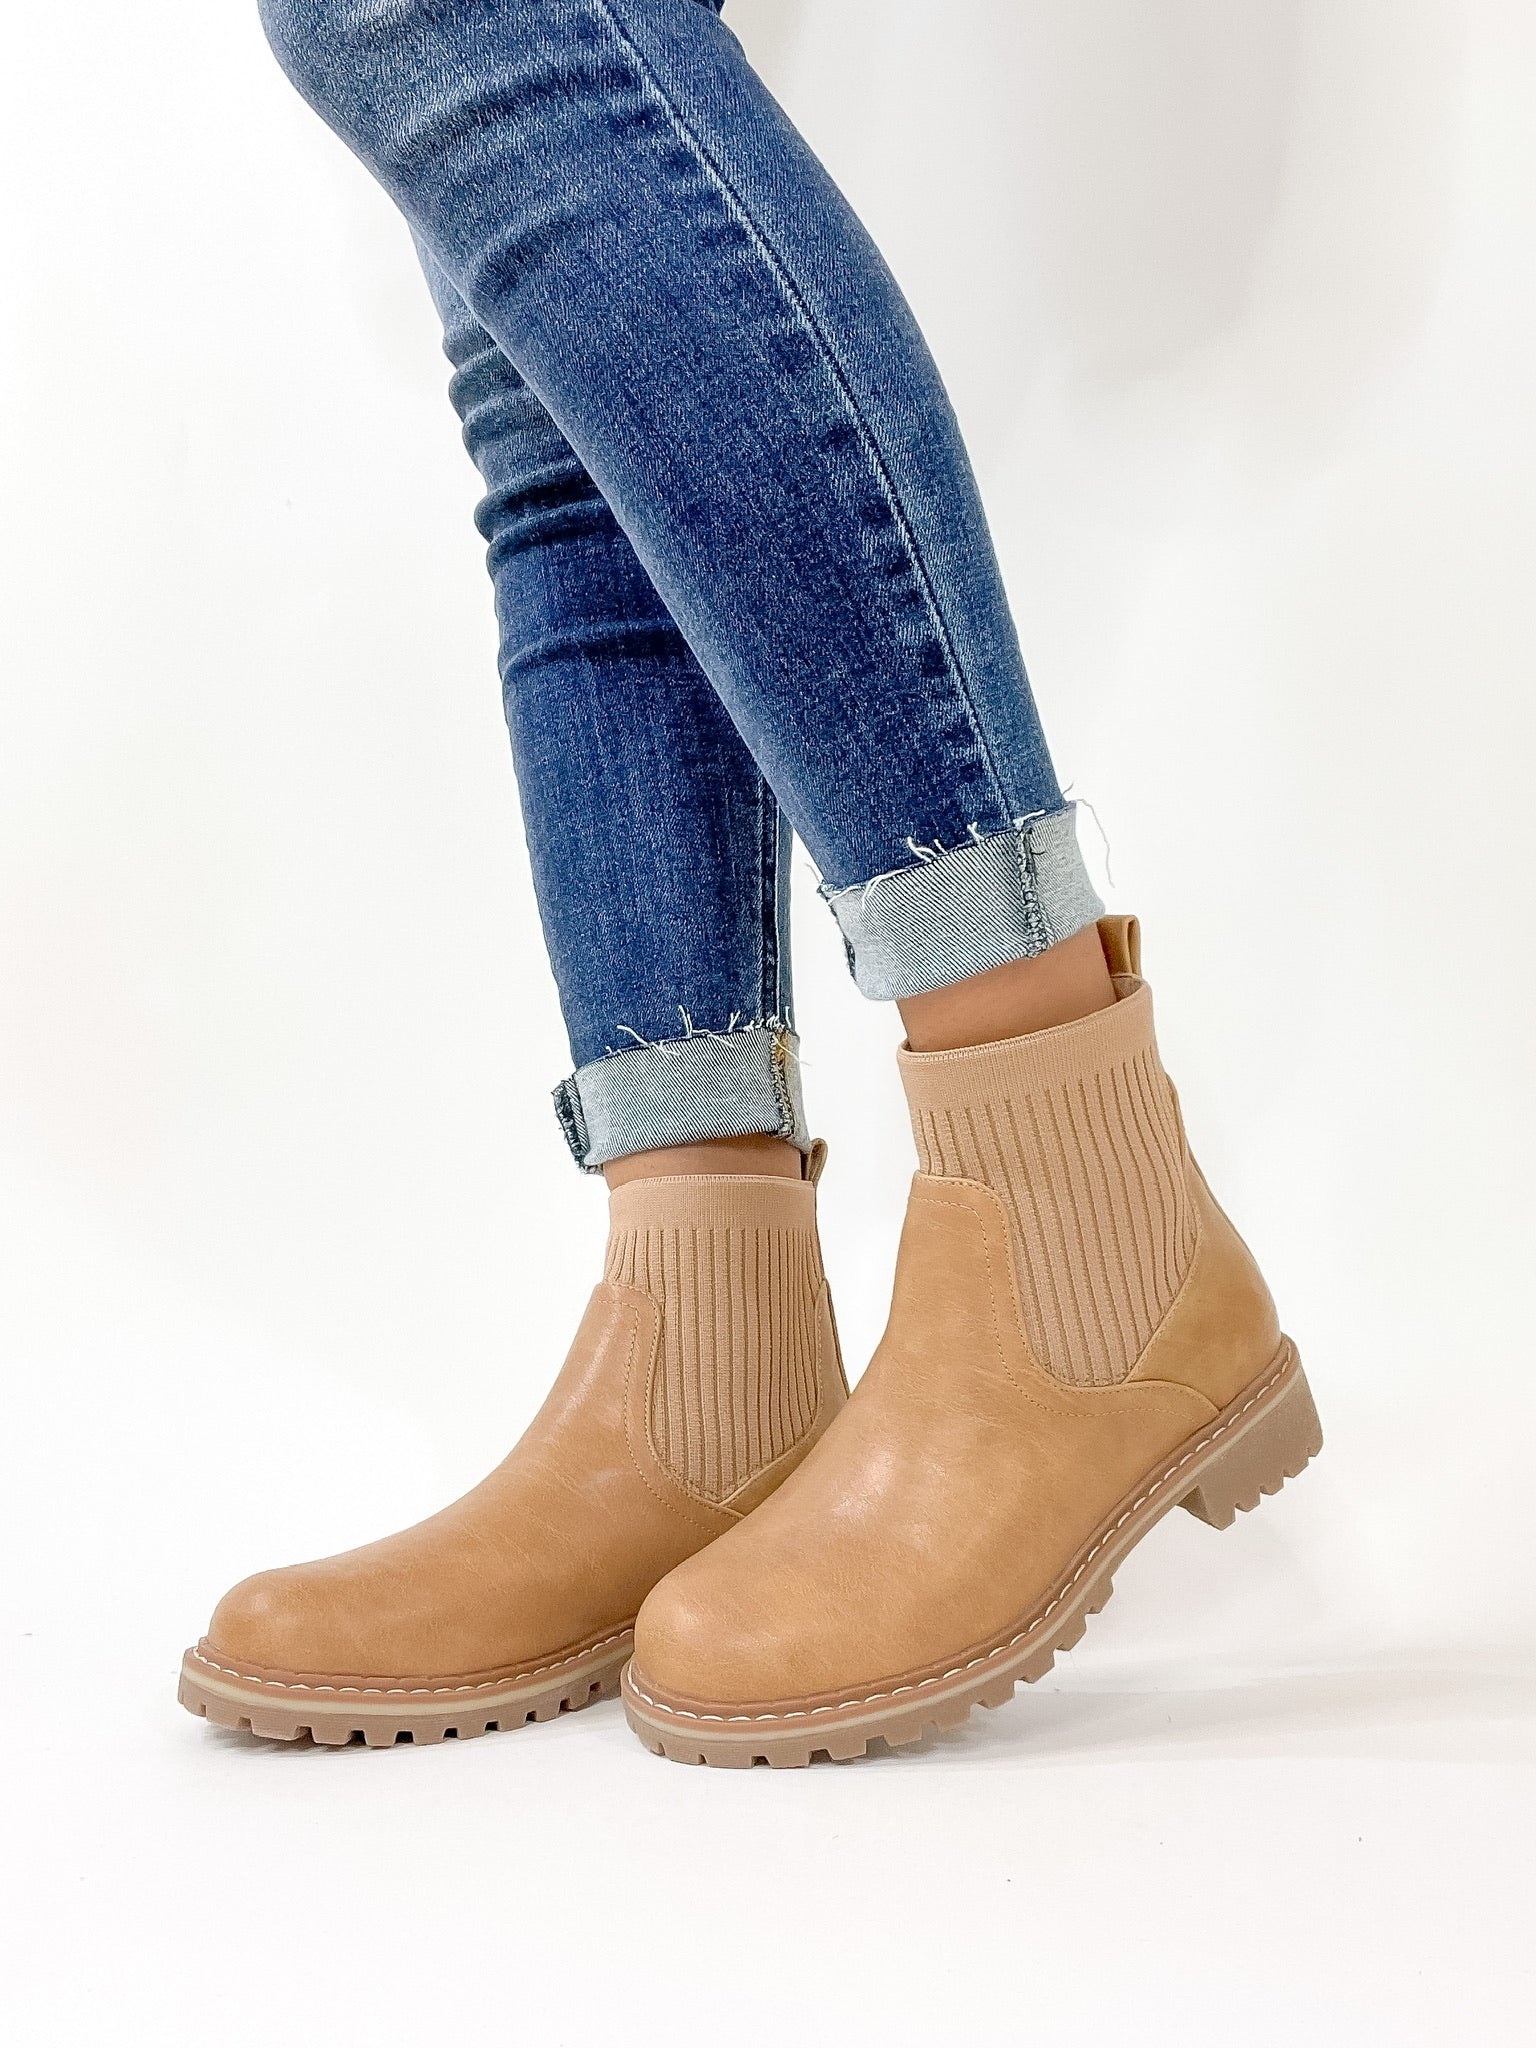 Corky's | Cabin Fever Slip On Booties in Caramel Tan